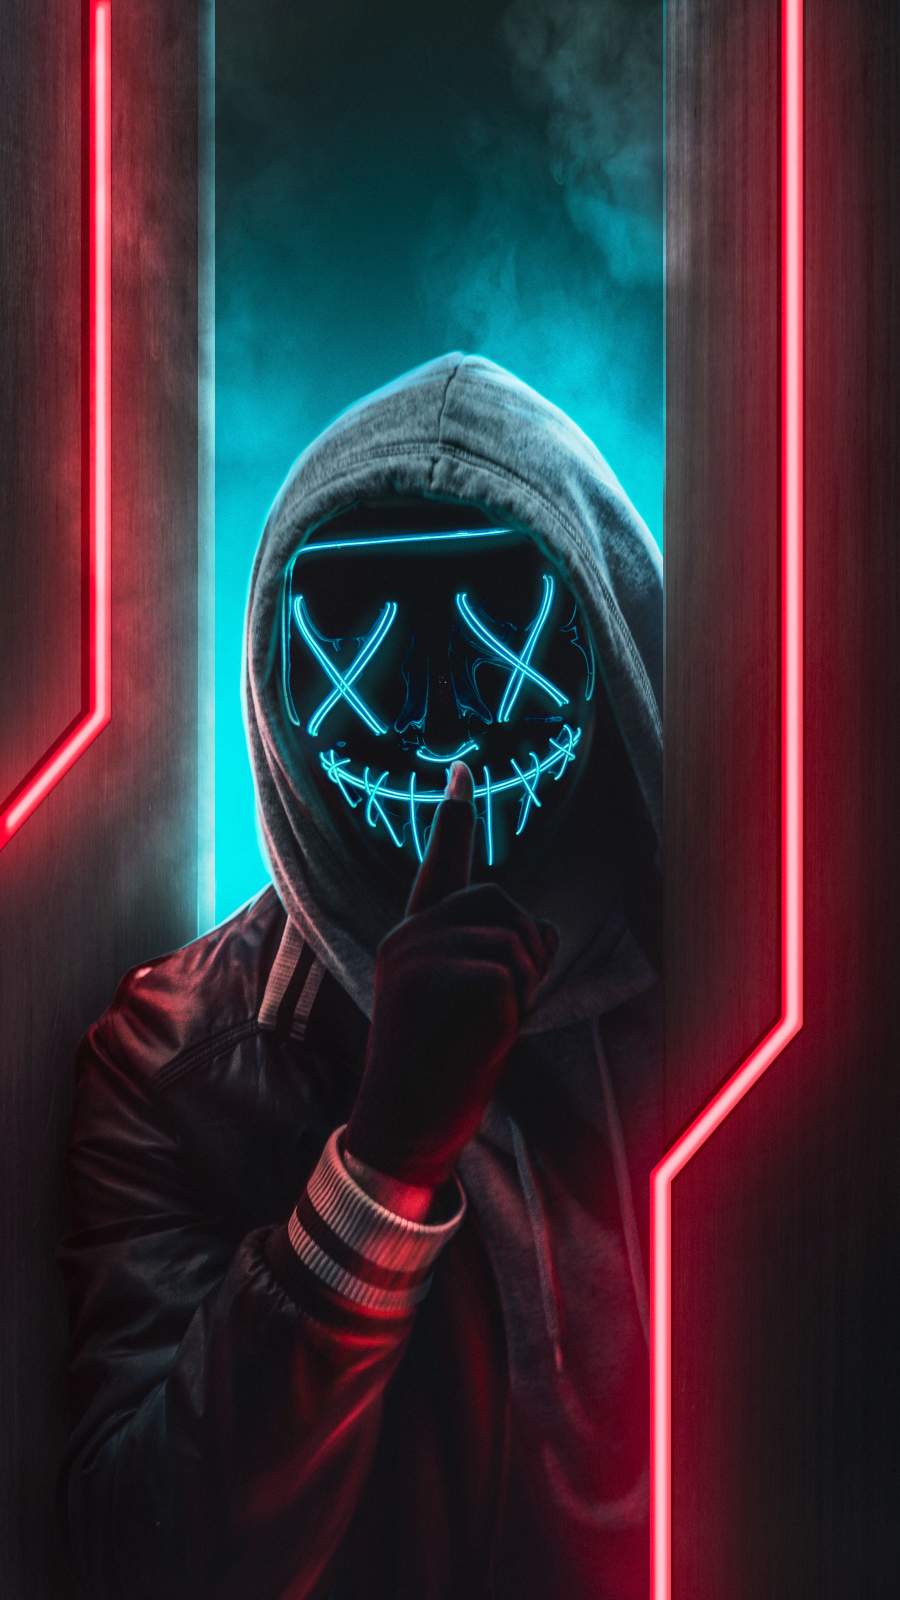 Anonymous Mask Hoodie Guy iPhone Wallpaper